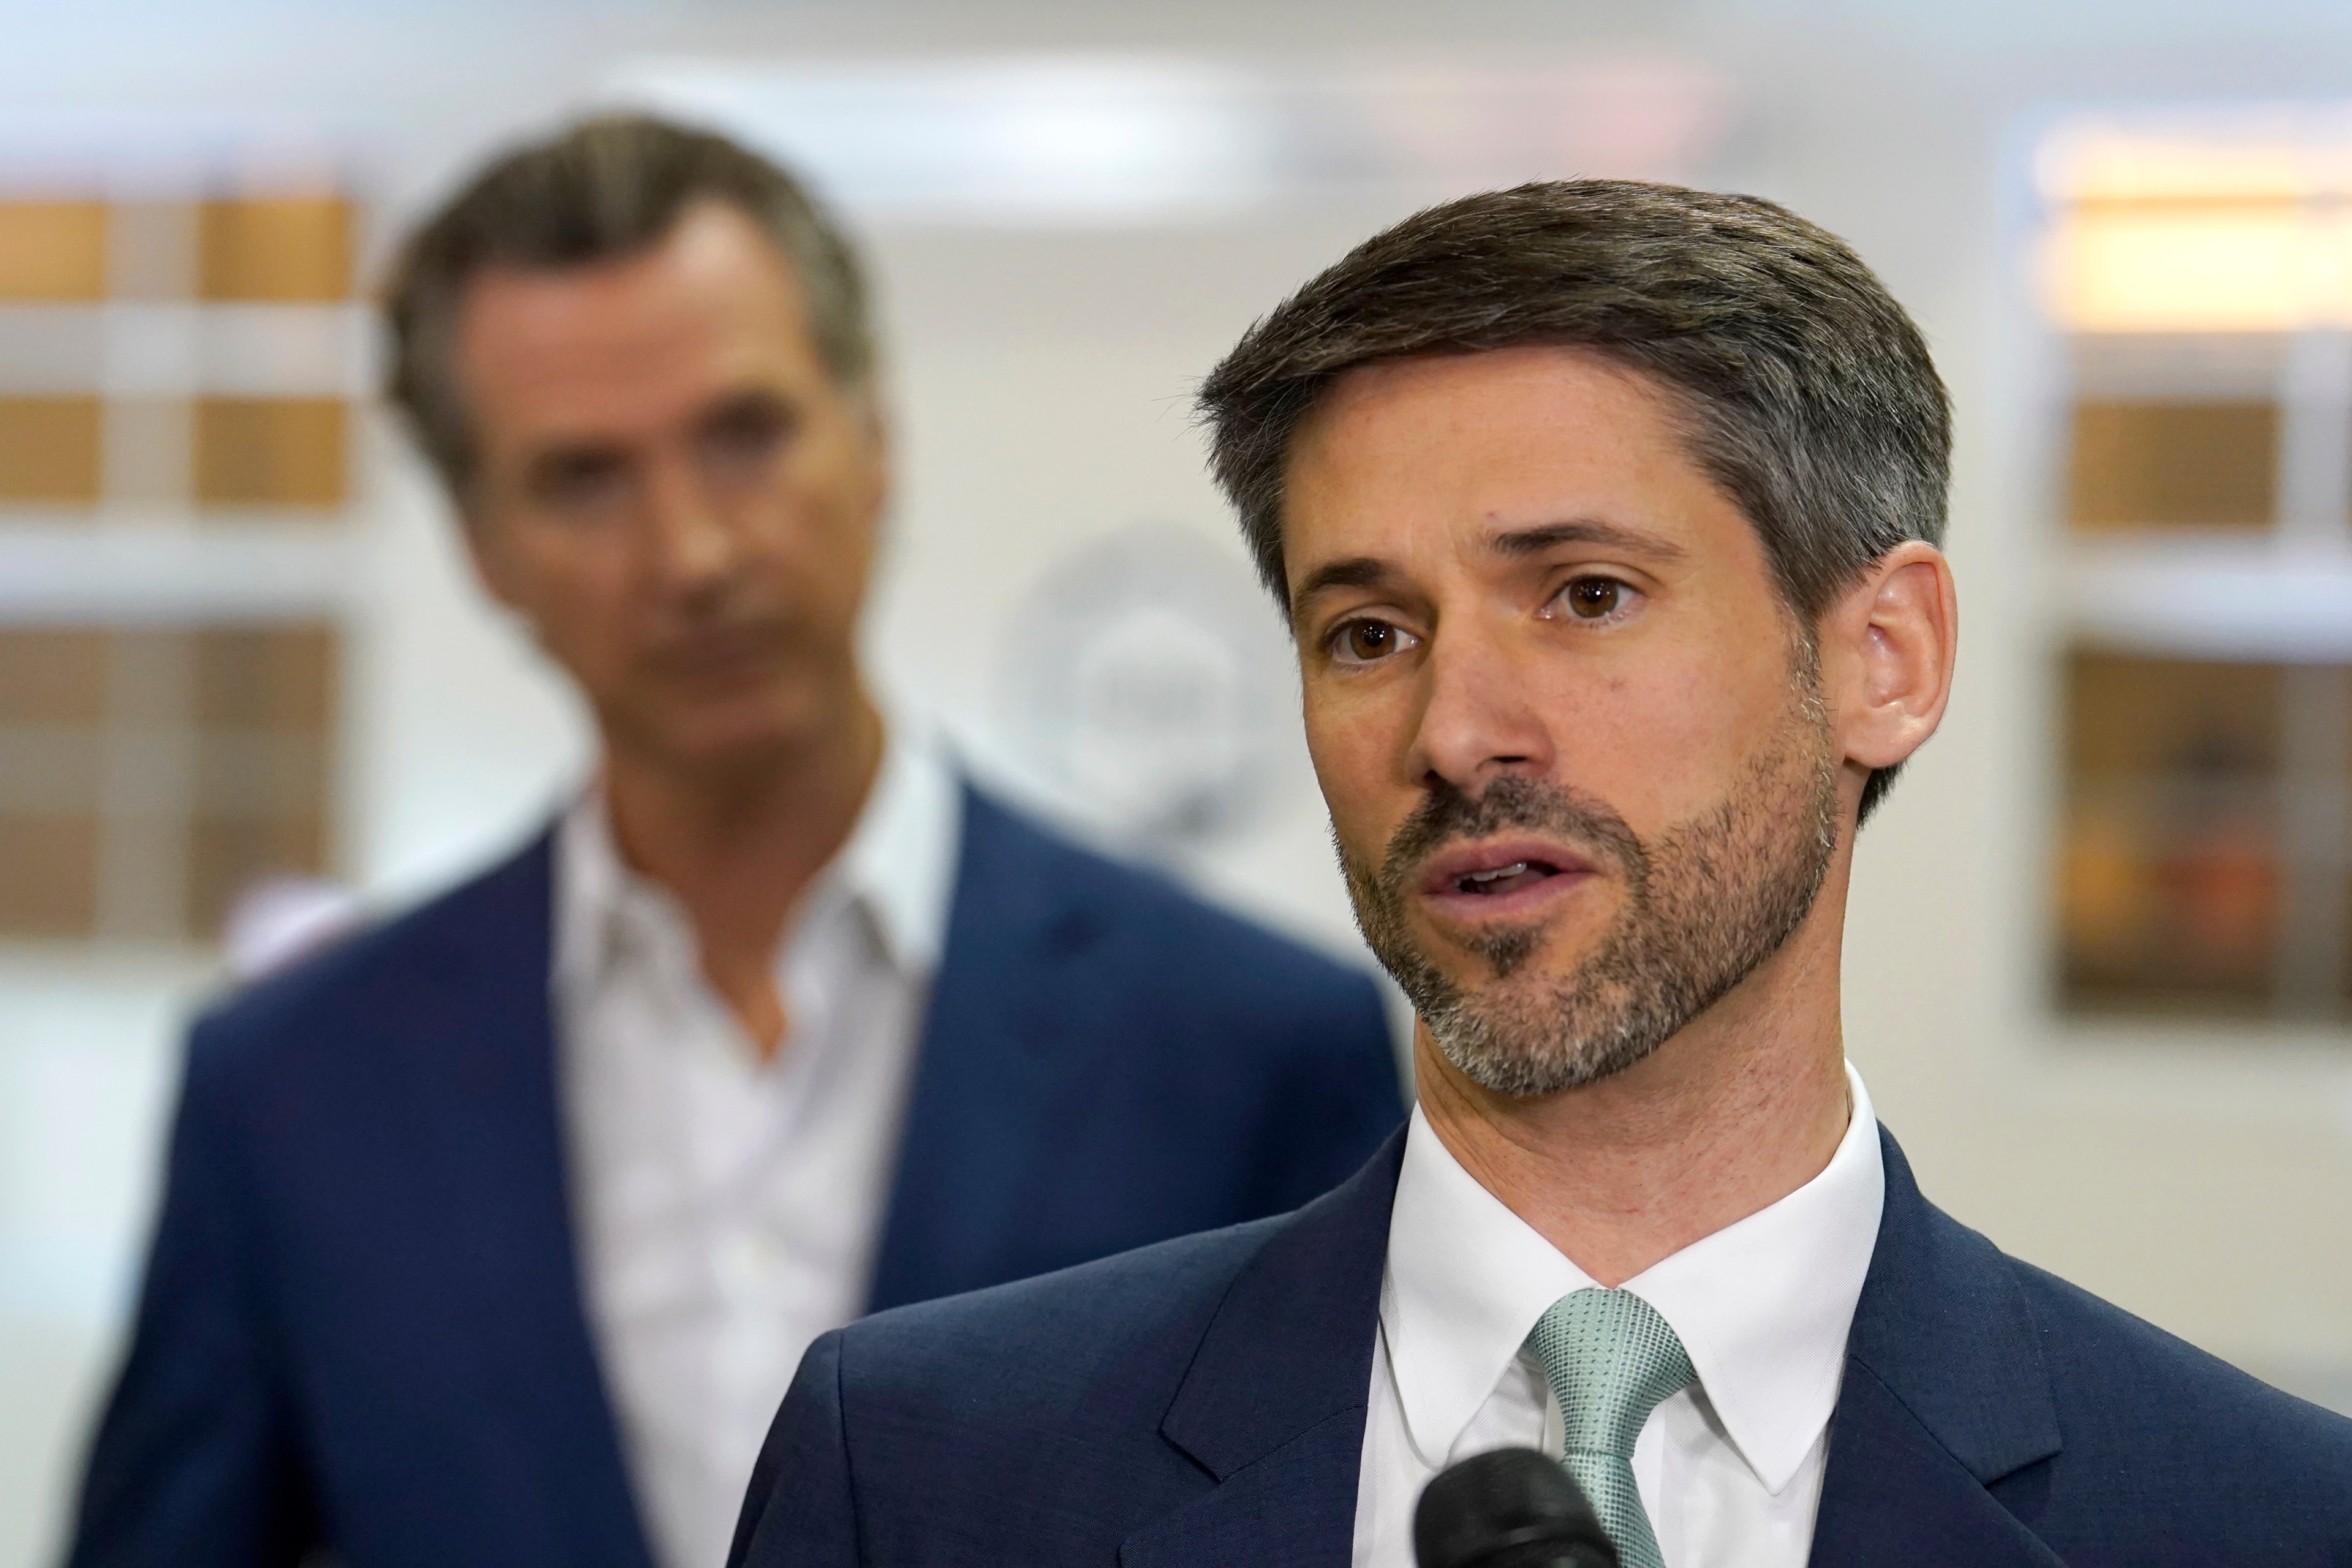 Two men in suits, one speaking into a microphone, the other slightly out of focus in the background.